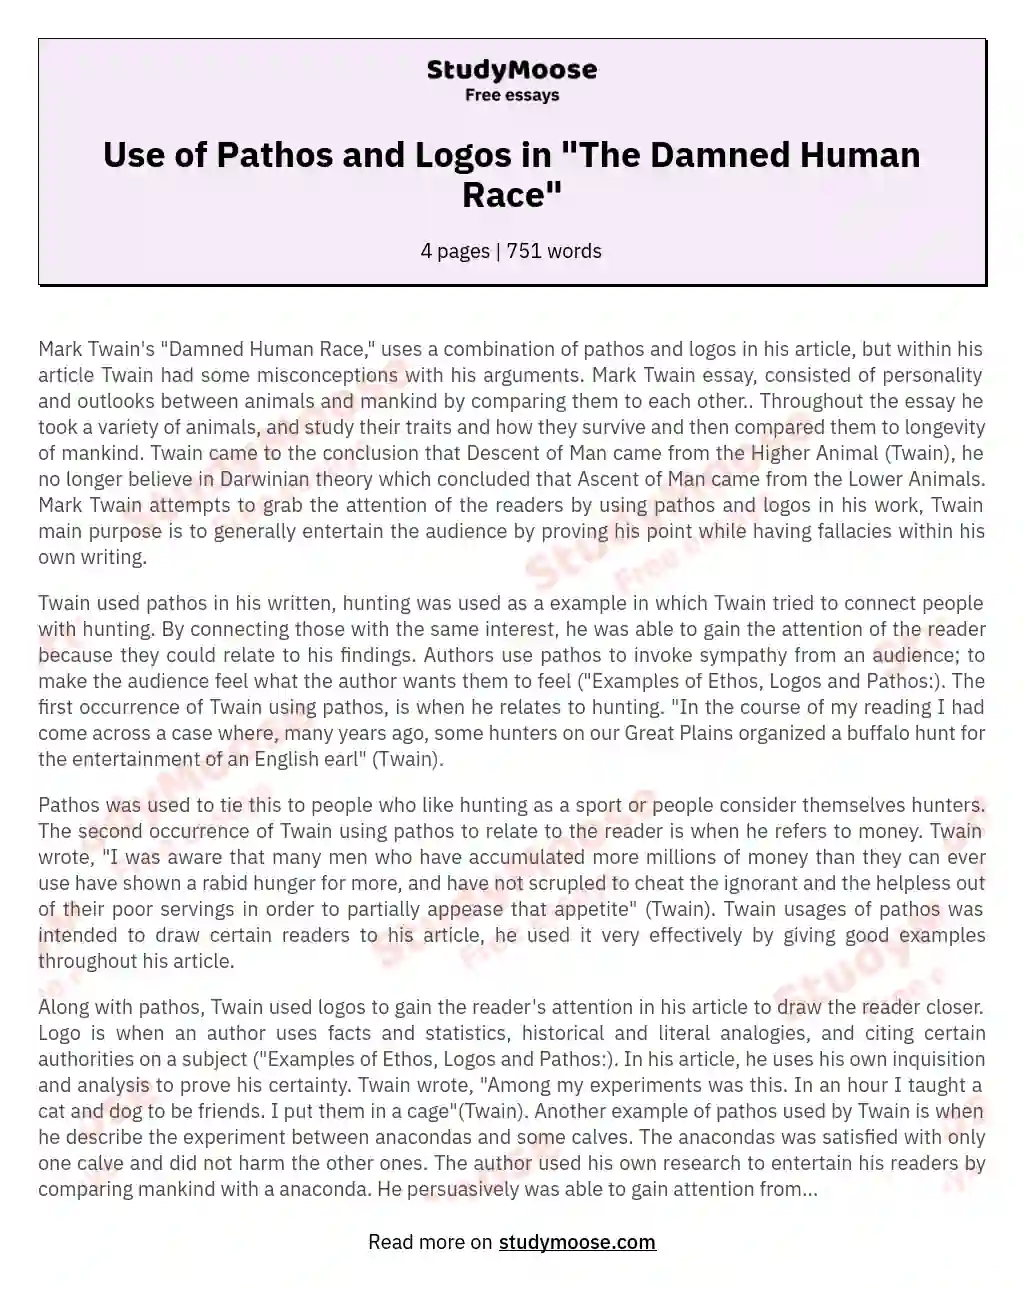 Use of Pathos and Logos in "The Damned Human Race" essay